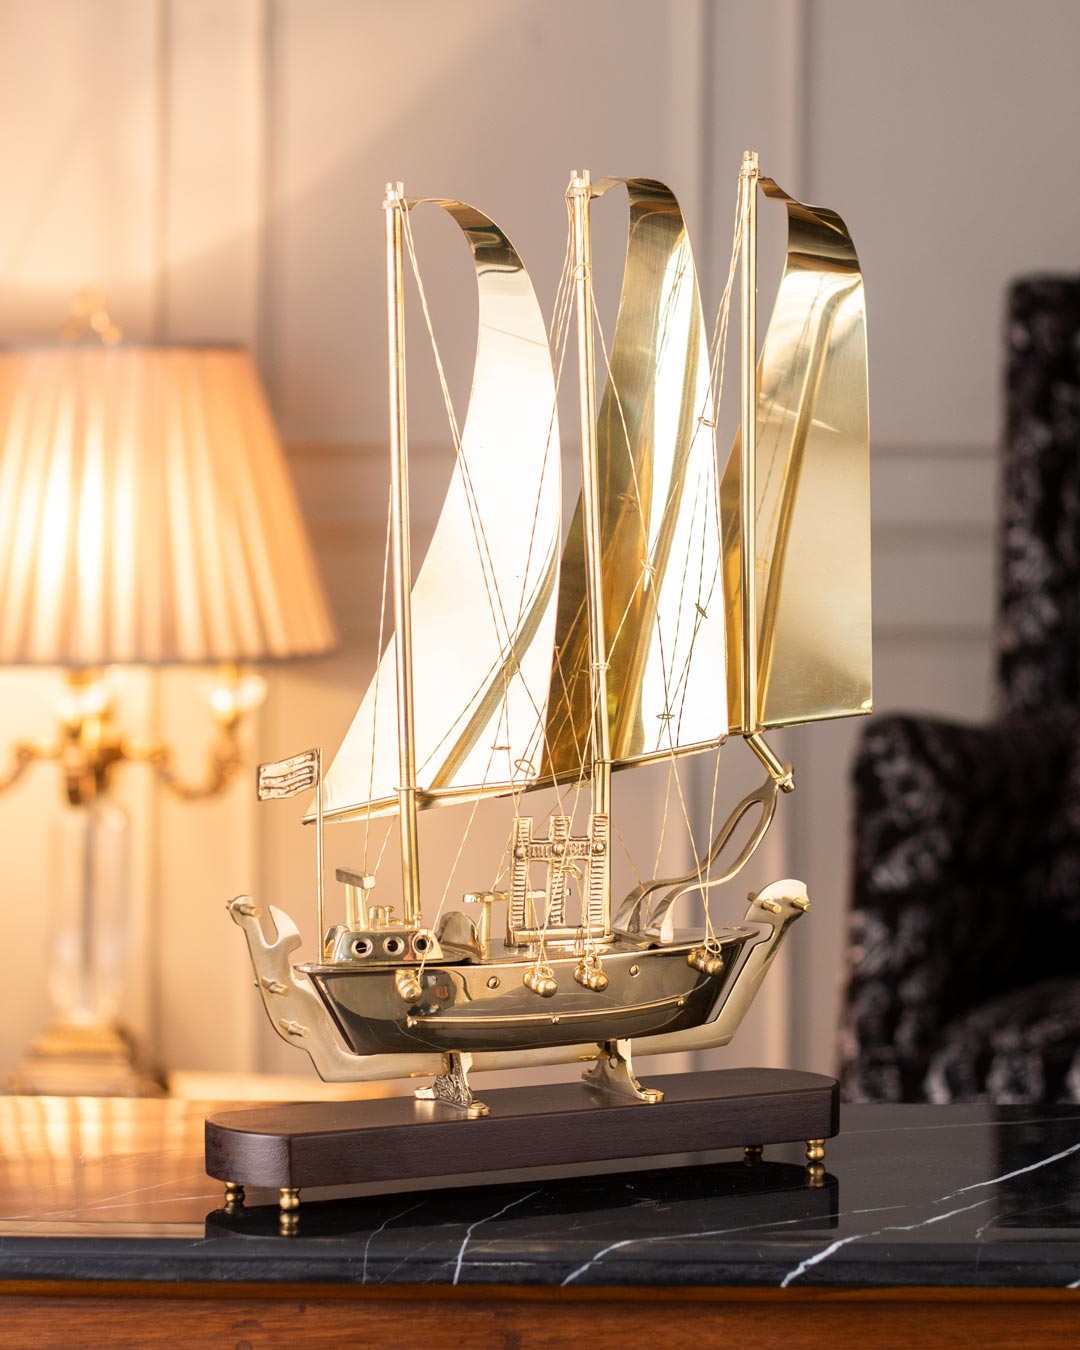 'Commodore' Handcrafted Brass Model Ship - 15"